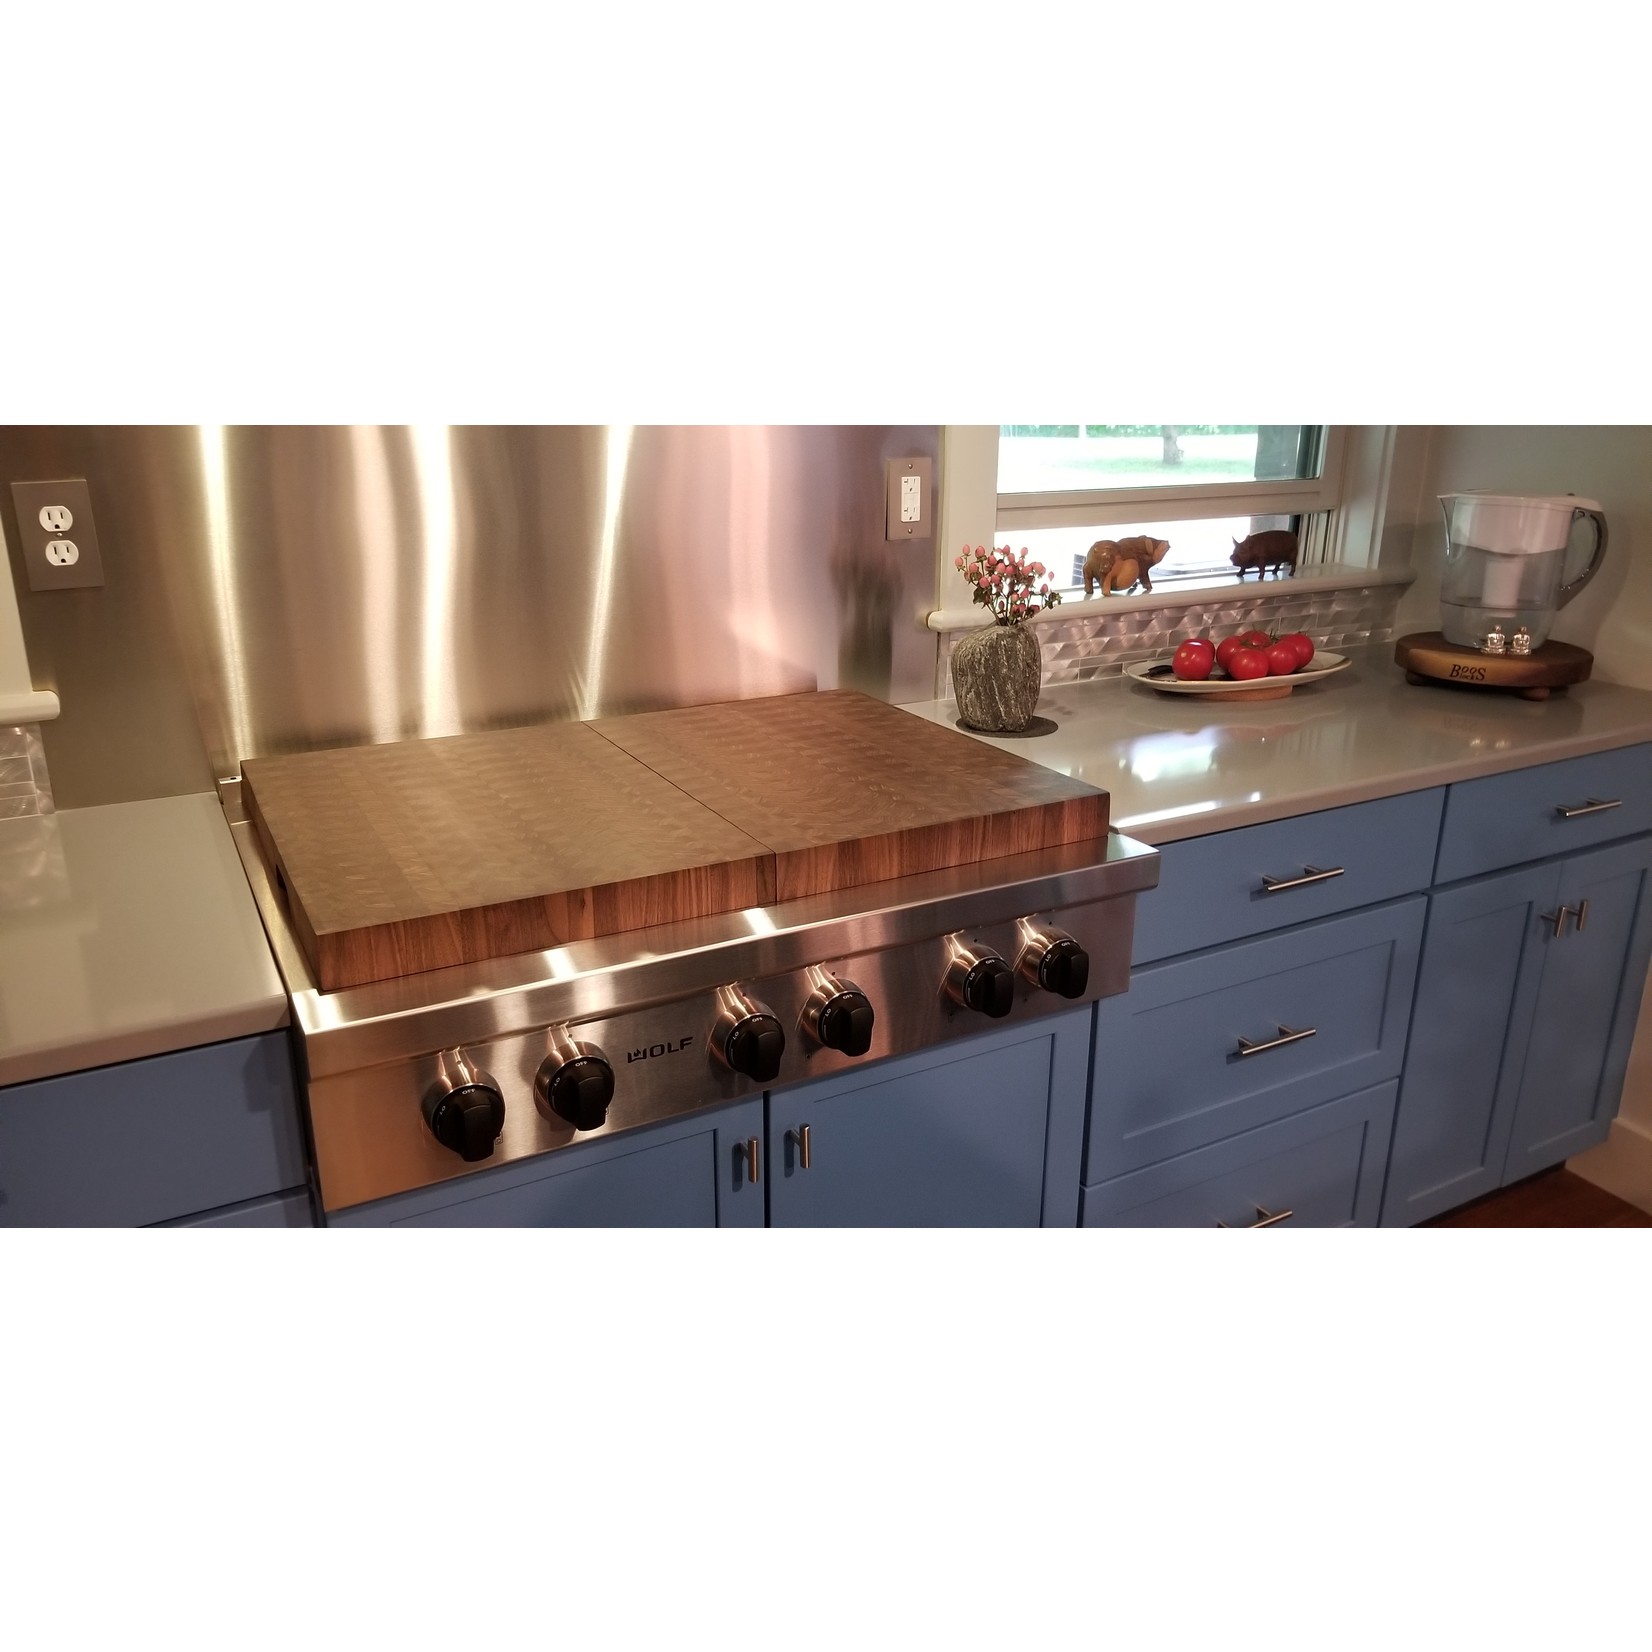 Custom Stove Top Covers- 2 Covers for 6 Burners